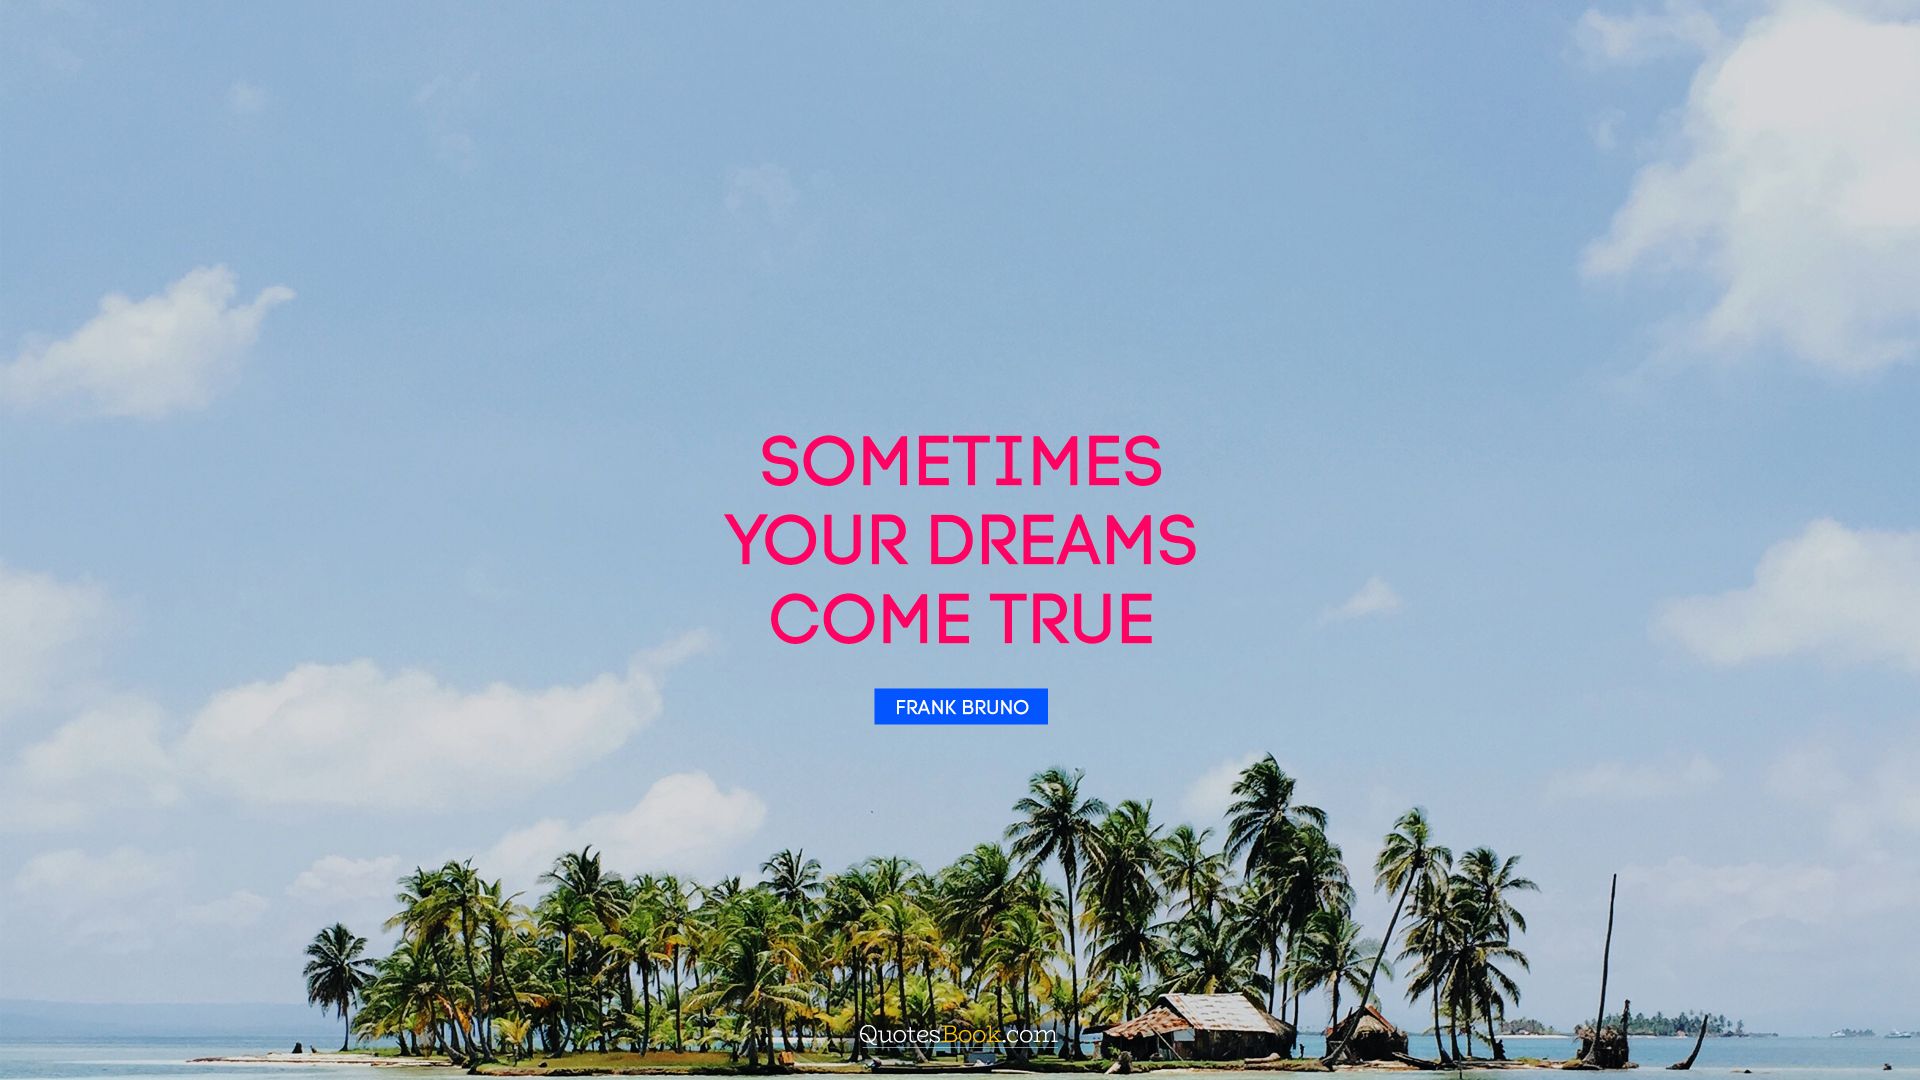 Sometimes your dreams come true. - Quote by Frank Bruno